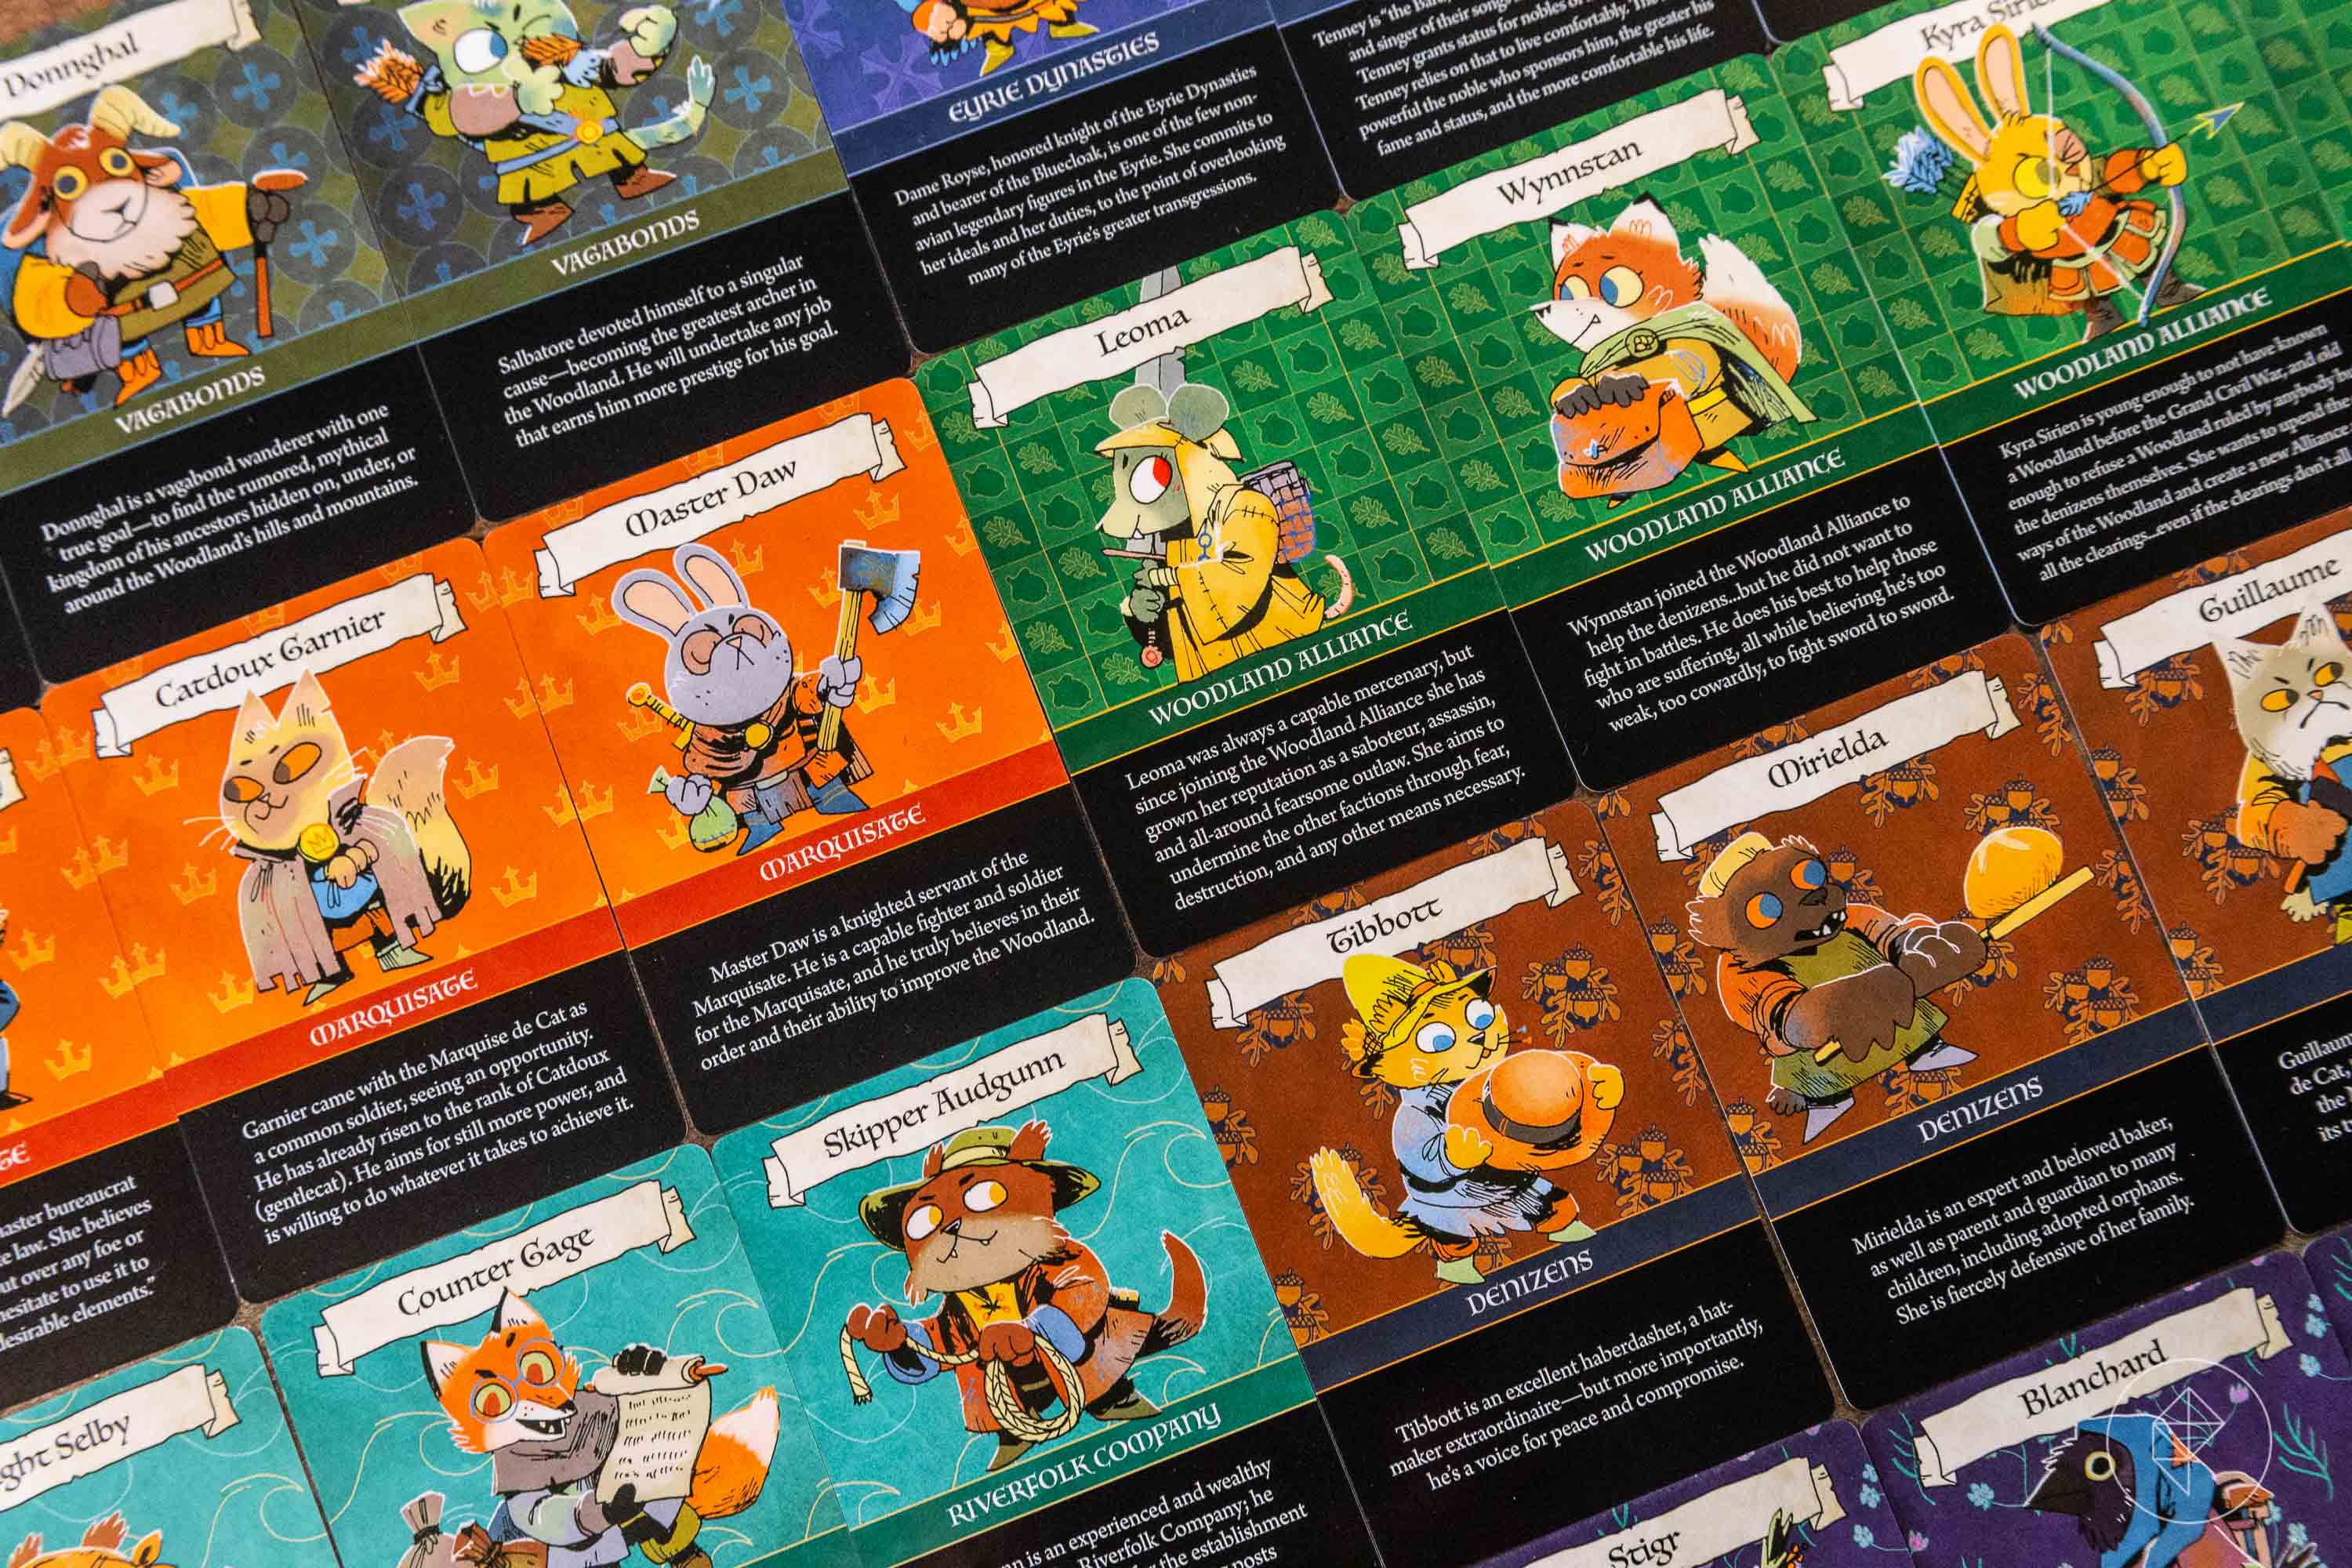 Cards with original art by Kyle Ferrin detail denizens of the woodland.